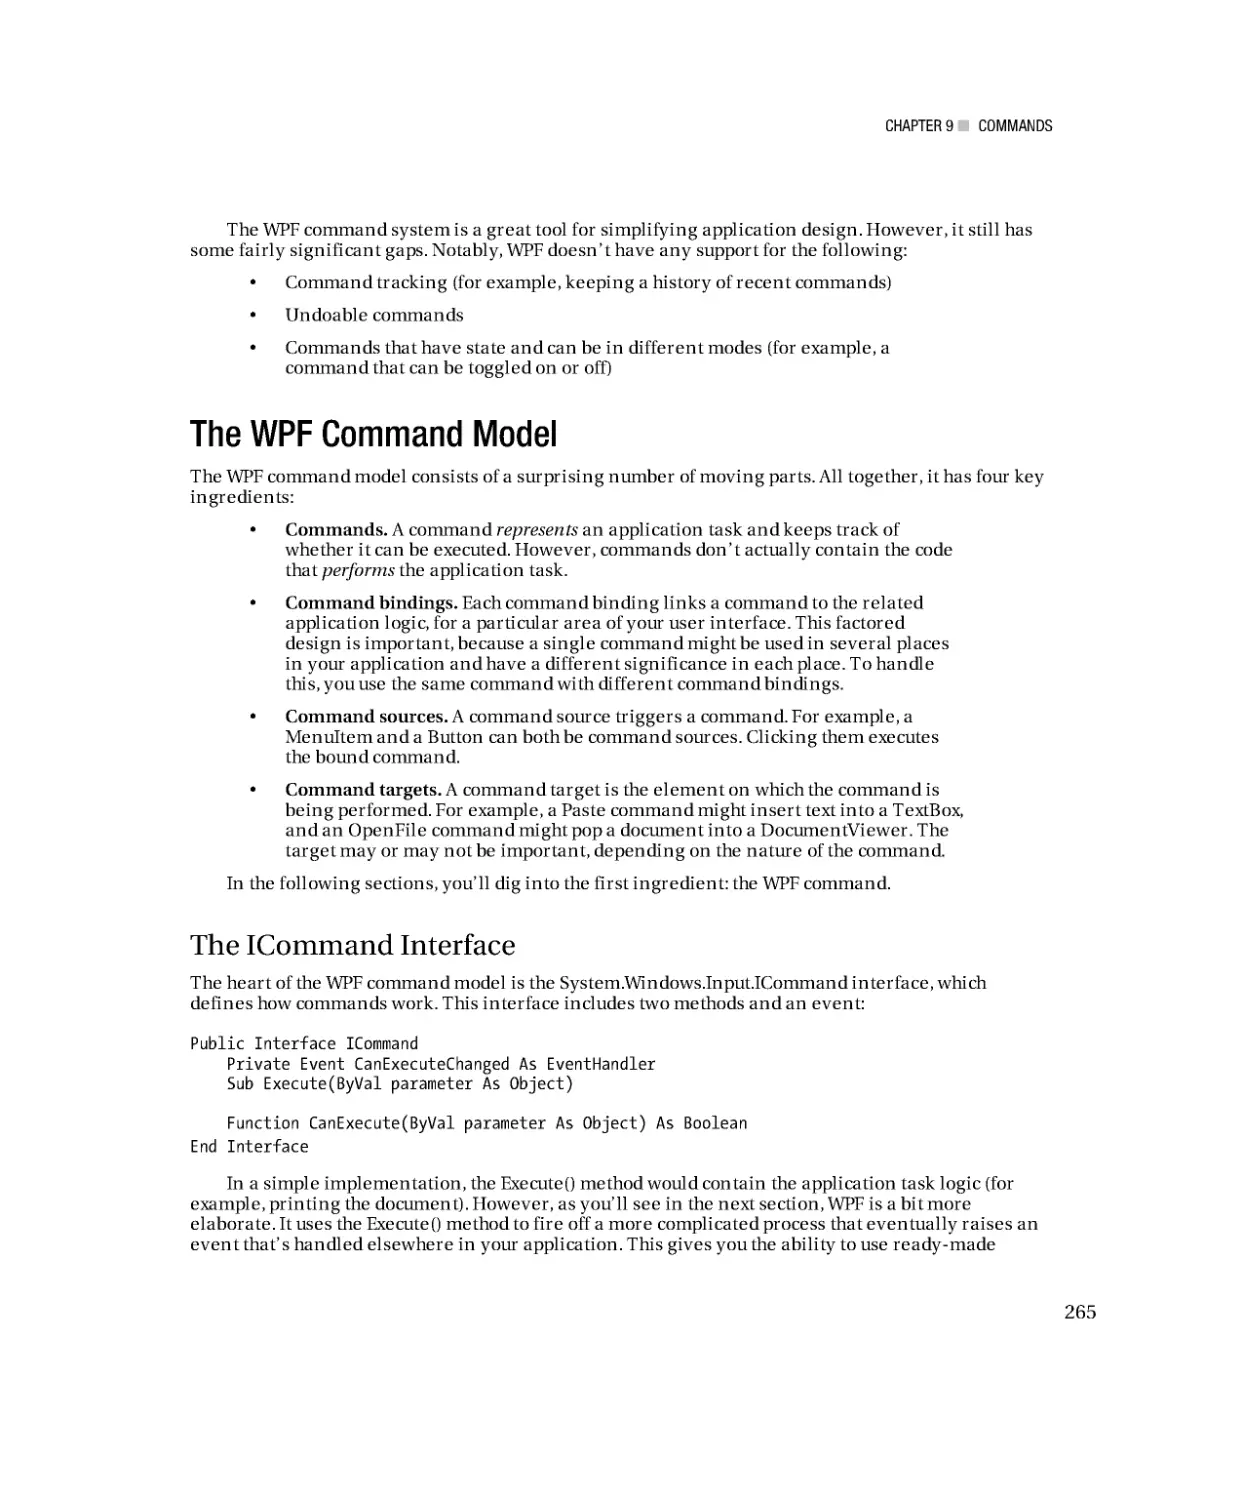 The WPF Command Model